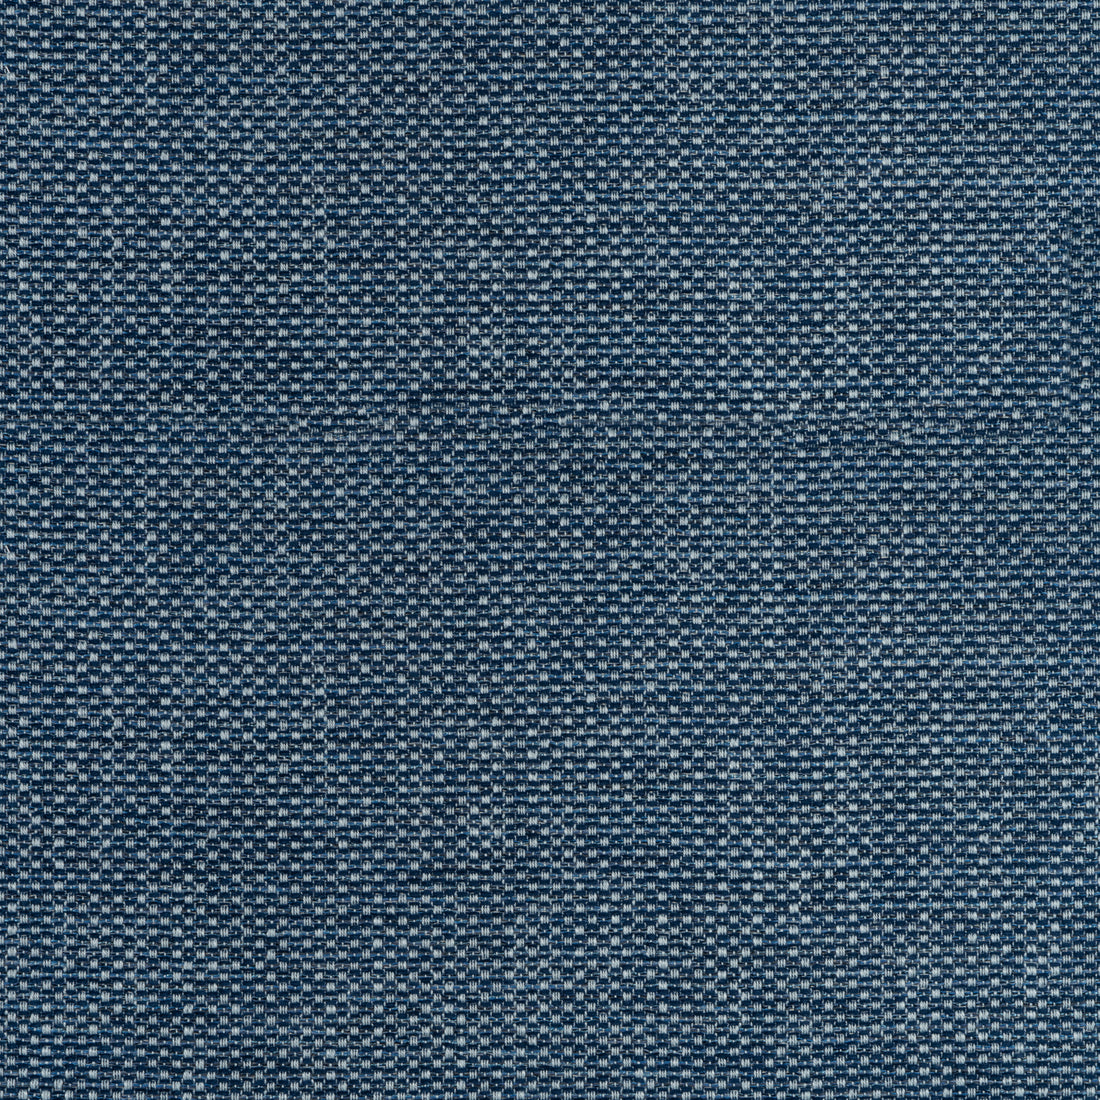 Cascade fabric in cadet color - pattern number W75266 - by Thibaut in the Elements collection